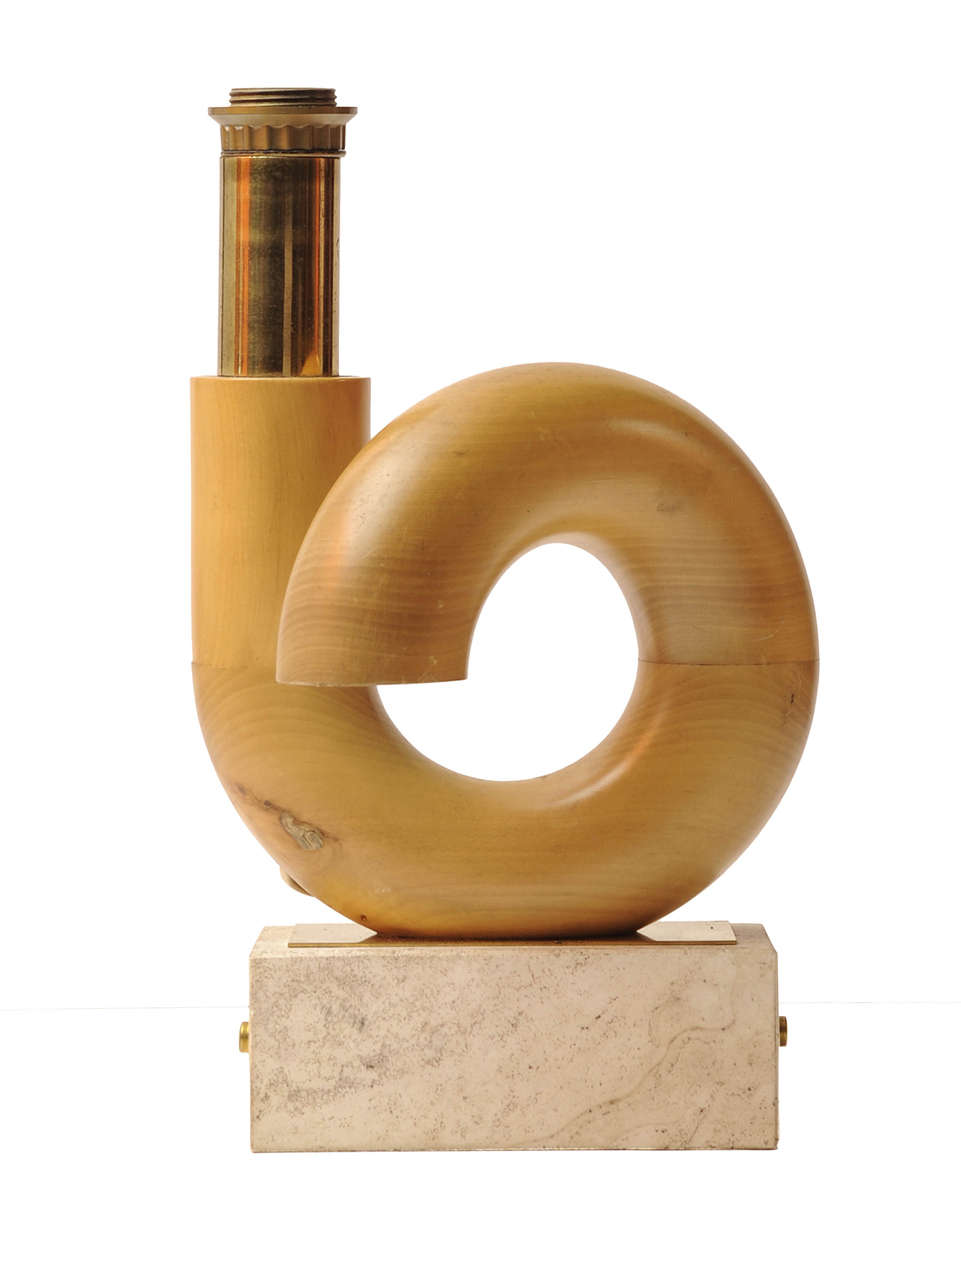 Lamp wood sculpture based travertine with brass decorations.